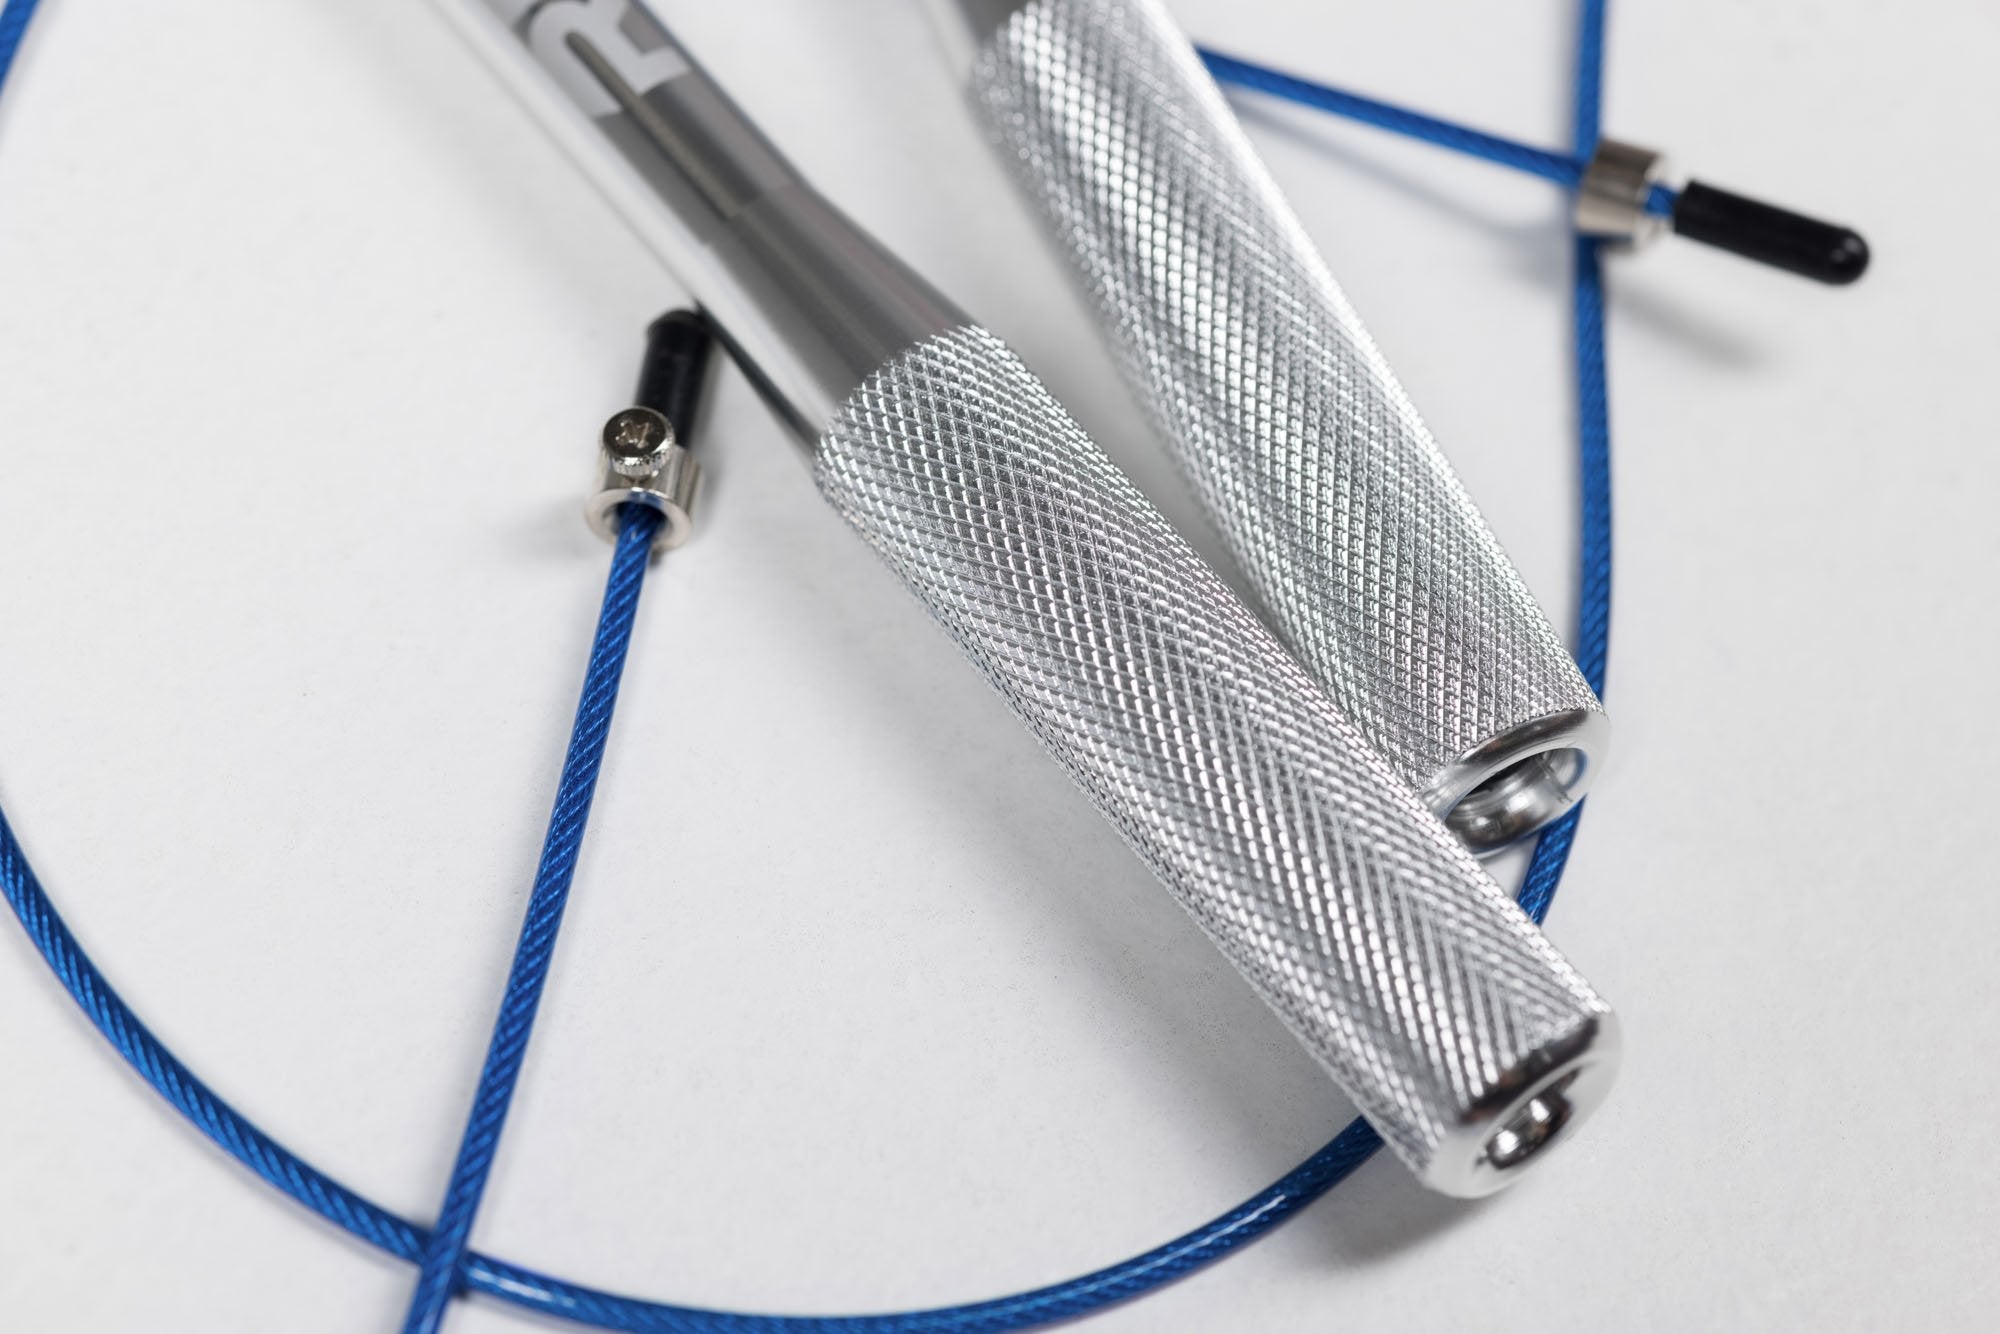 Competition Speed Rope Close Up of Knurled Handles and Adjustments